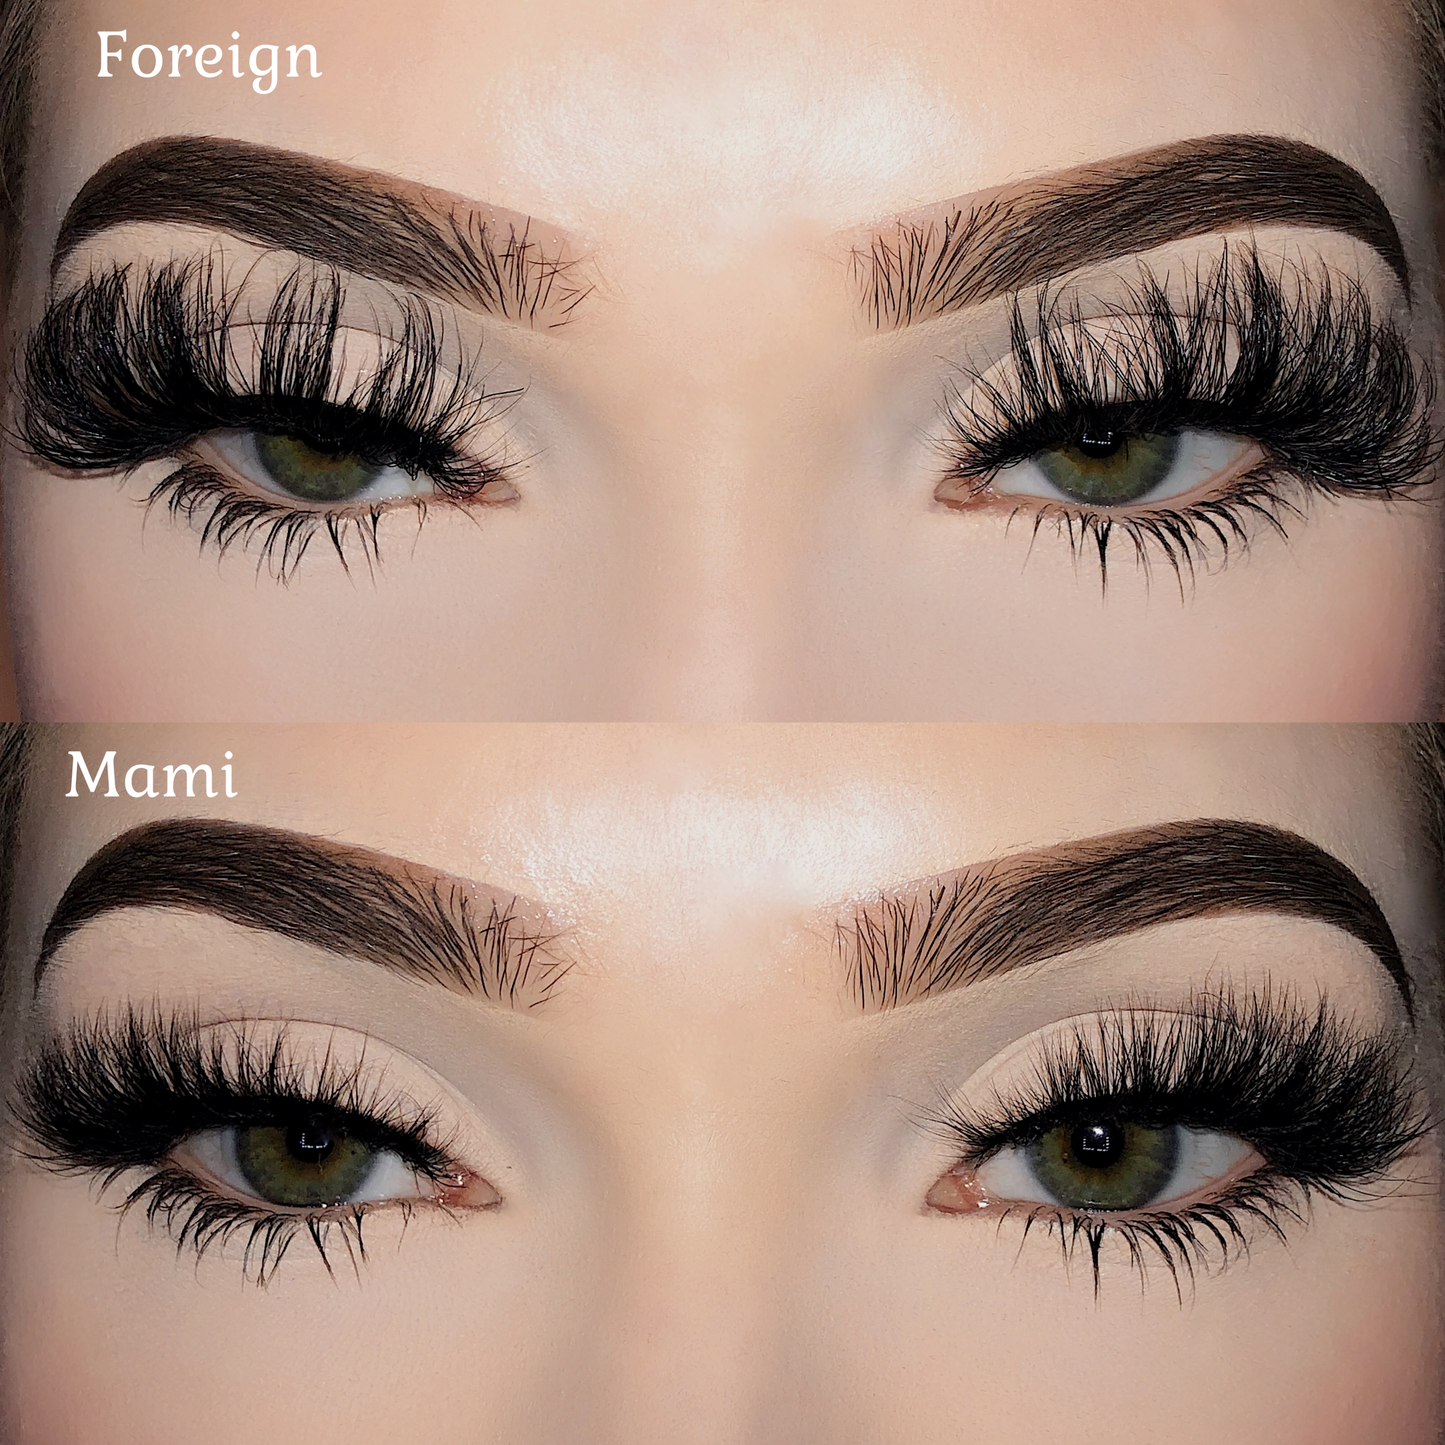 Lash Duo foreign & Mami